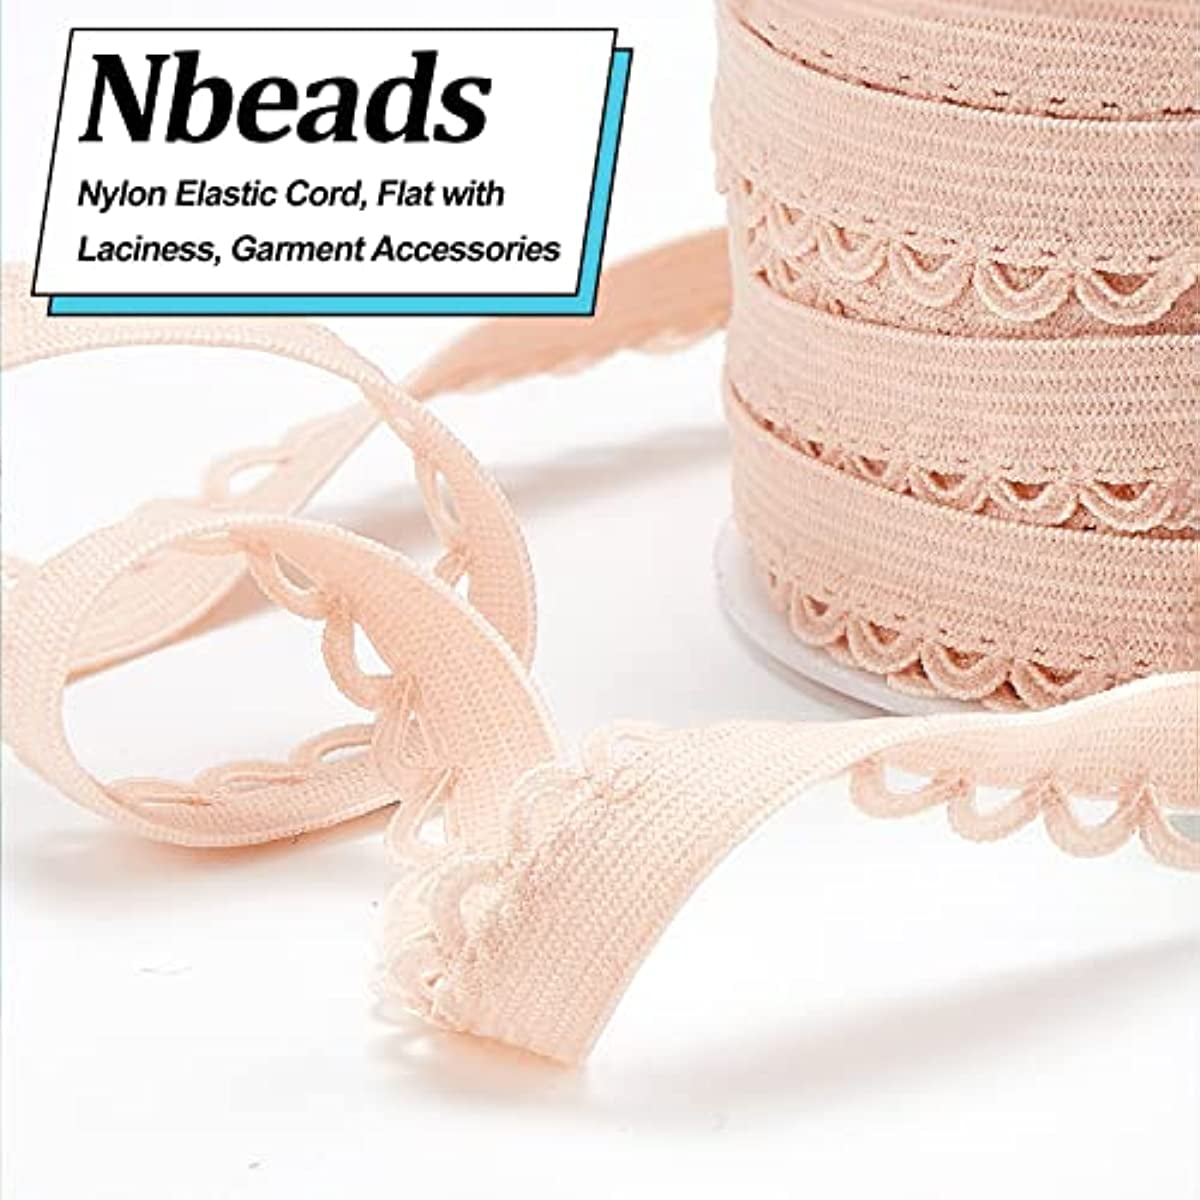 10.94 Yards Picot-Edge Lingerie Elastic Stretch 1/2 Flat with Laciness  Elastic Cord Strap Edge Crocheted Lace Cord Ribbon for DIY Sewing Wedding  Decorations and Gift Wrapping Misty Rose 